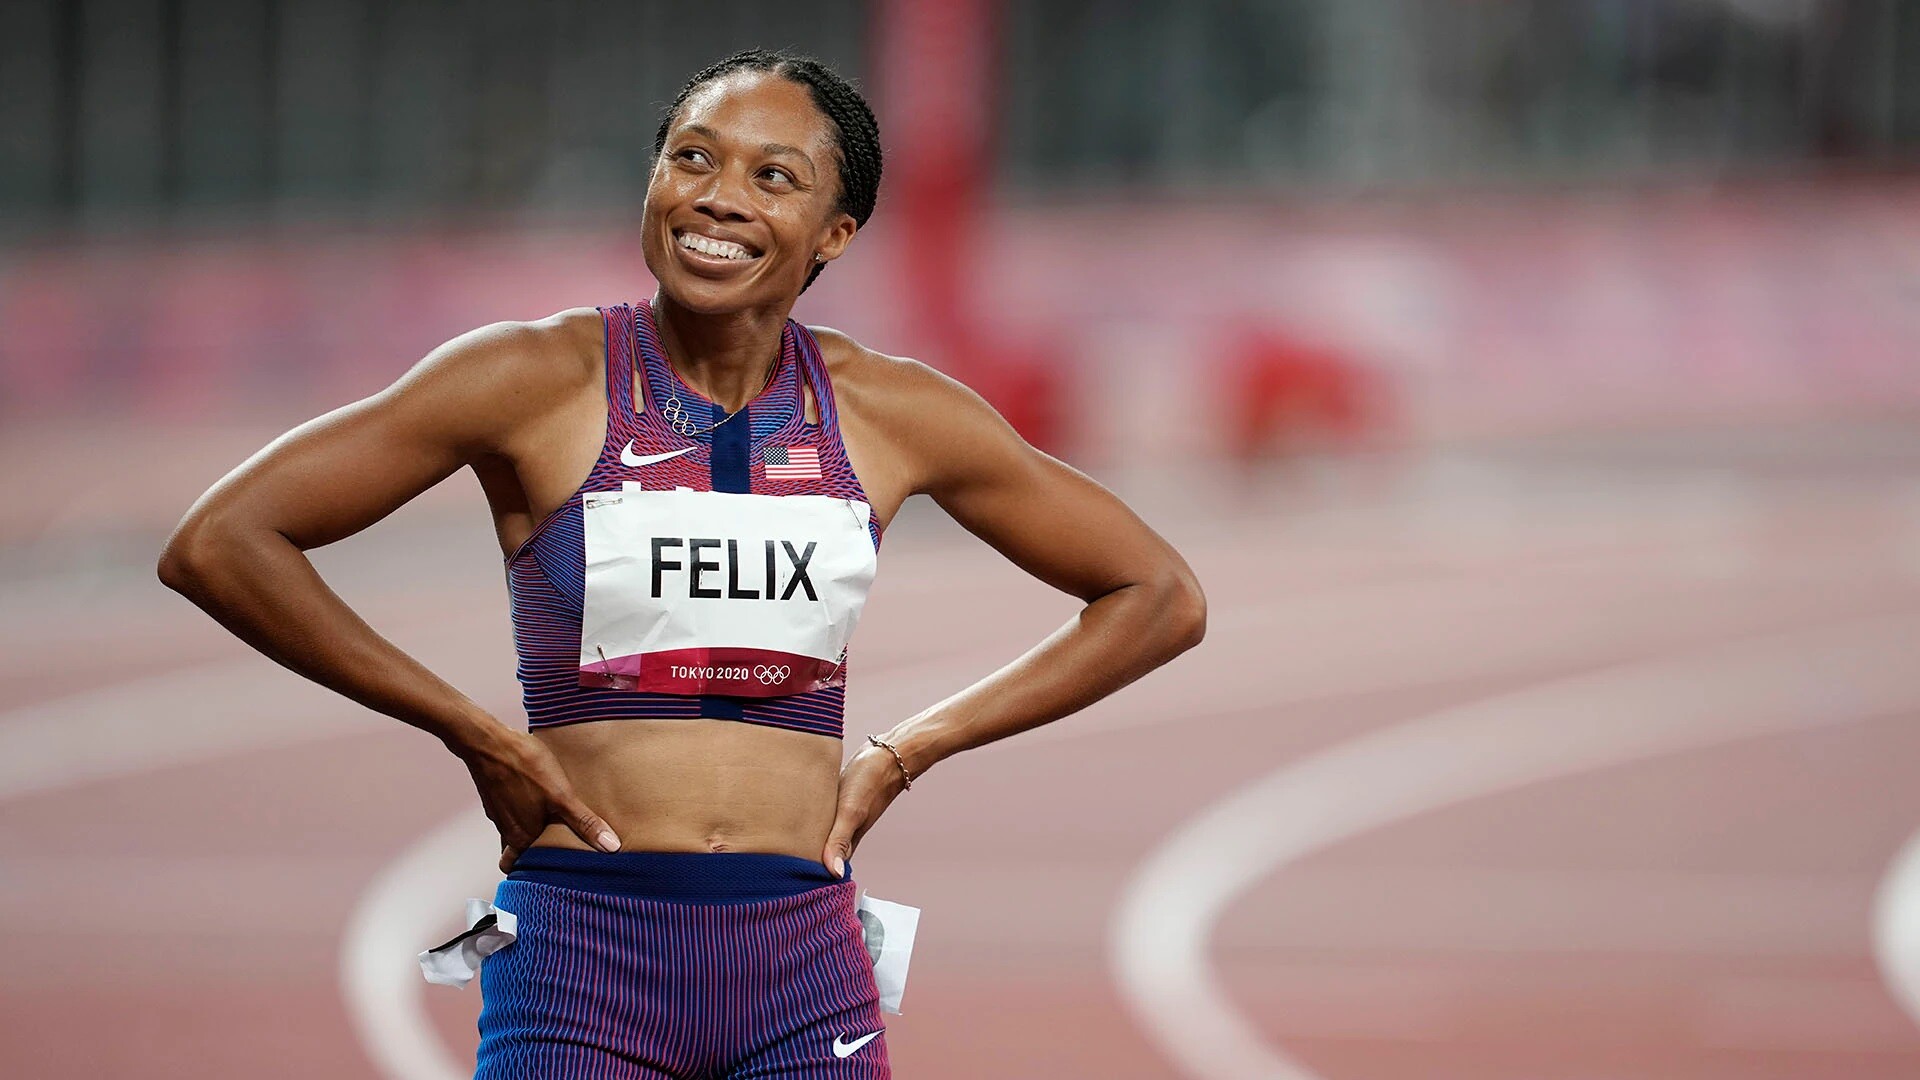 Allyson Felix: The only female track star to win seven Olympic golds, Historic 10th medal. 1920x1080 Full HD Wallpaper.